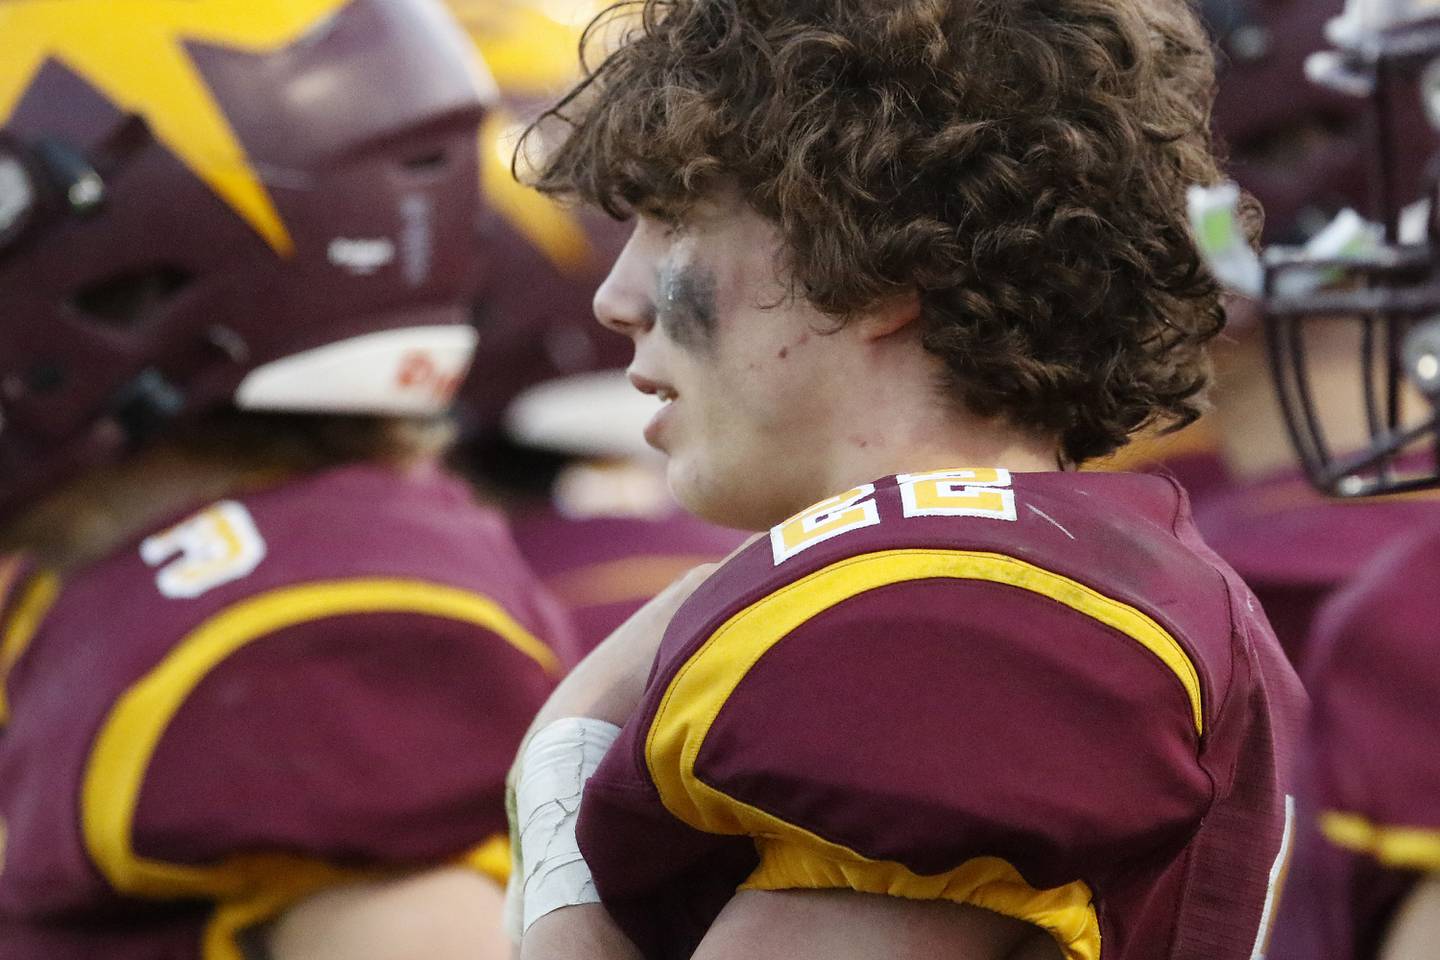 Richmond-Burton's Landon Jacoby watches with tears in his eyes on the sidelines in the final minute of play during their IHSA Class 4A semifinal football game on Saturday, Nov. 20, 2021 at Richmond-Burton High School in Richmond. Joliet Catholic won 35-18, delivering Richmond-Burton their first loss in three years.